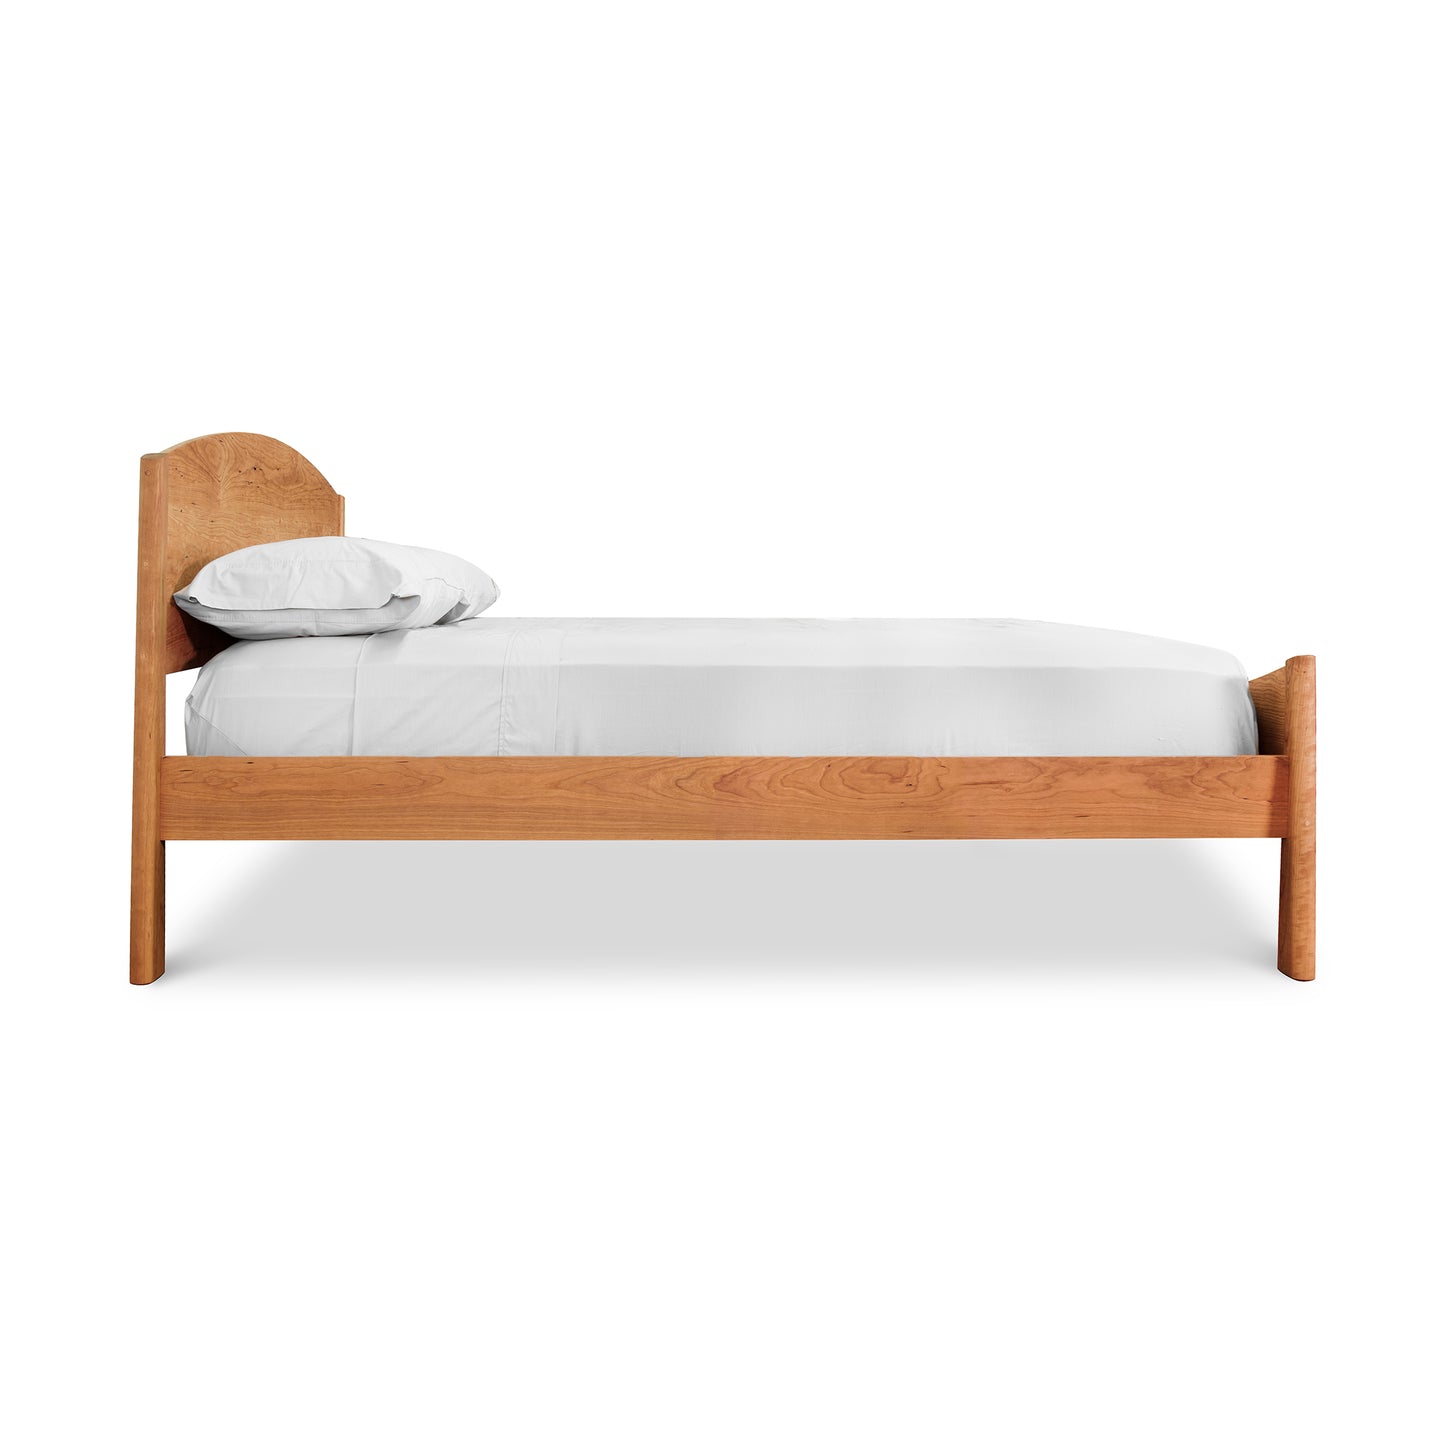 A single Cherry Moon bed by Maple Corner Woodworks with a white mattress and a single pillow against a plain white background. The bed features a curved headboard and streamlined, simple design.